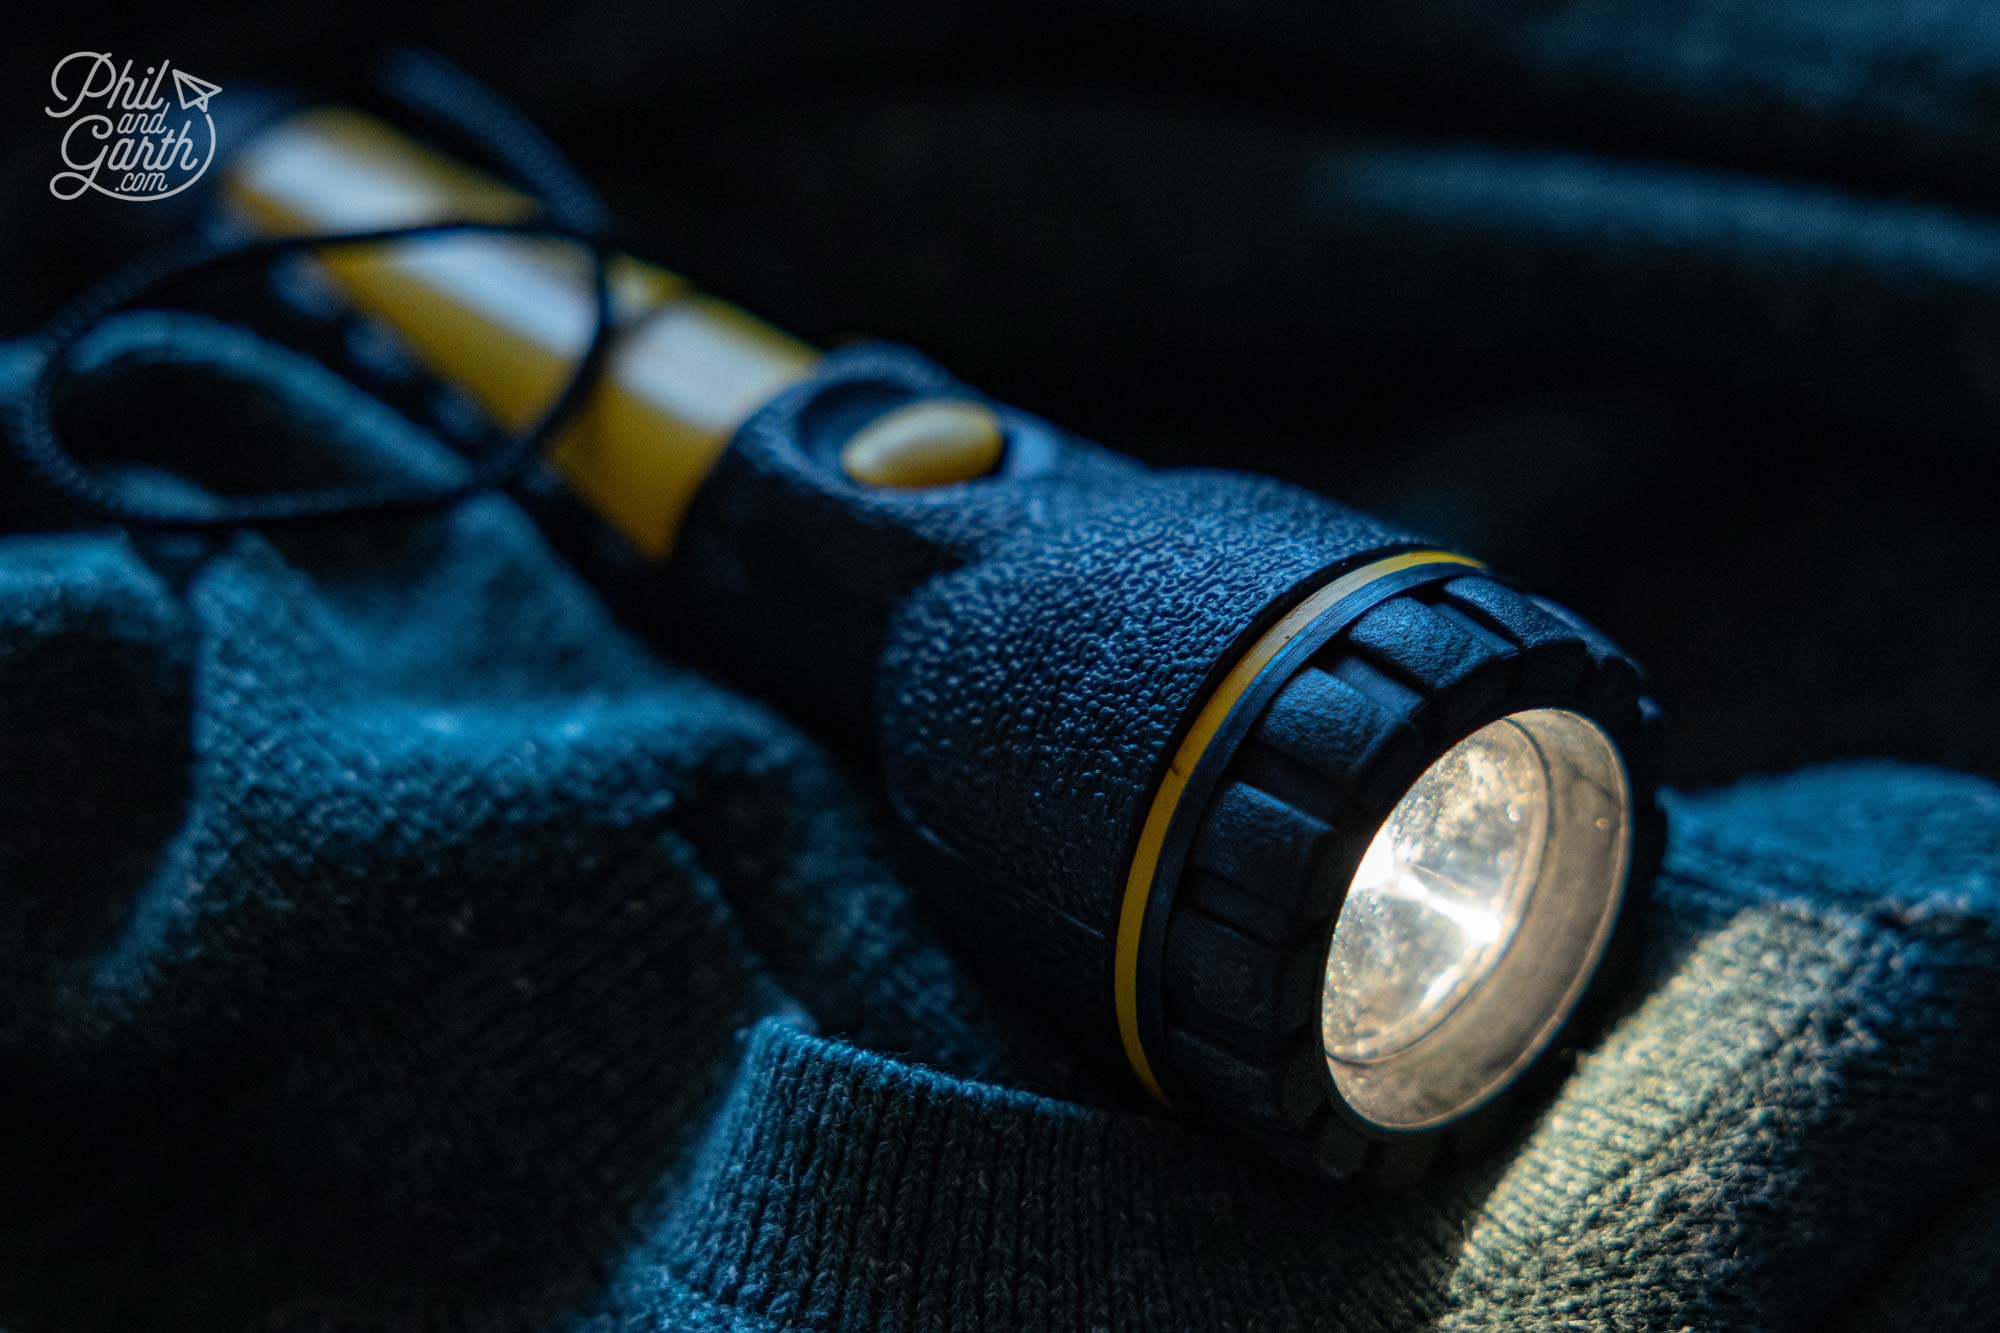 Add a torch or head torch to your festival packing list